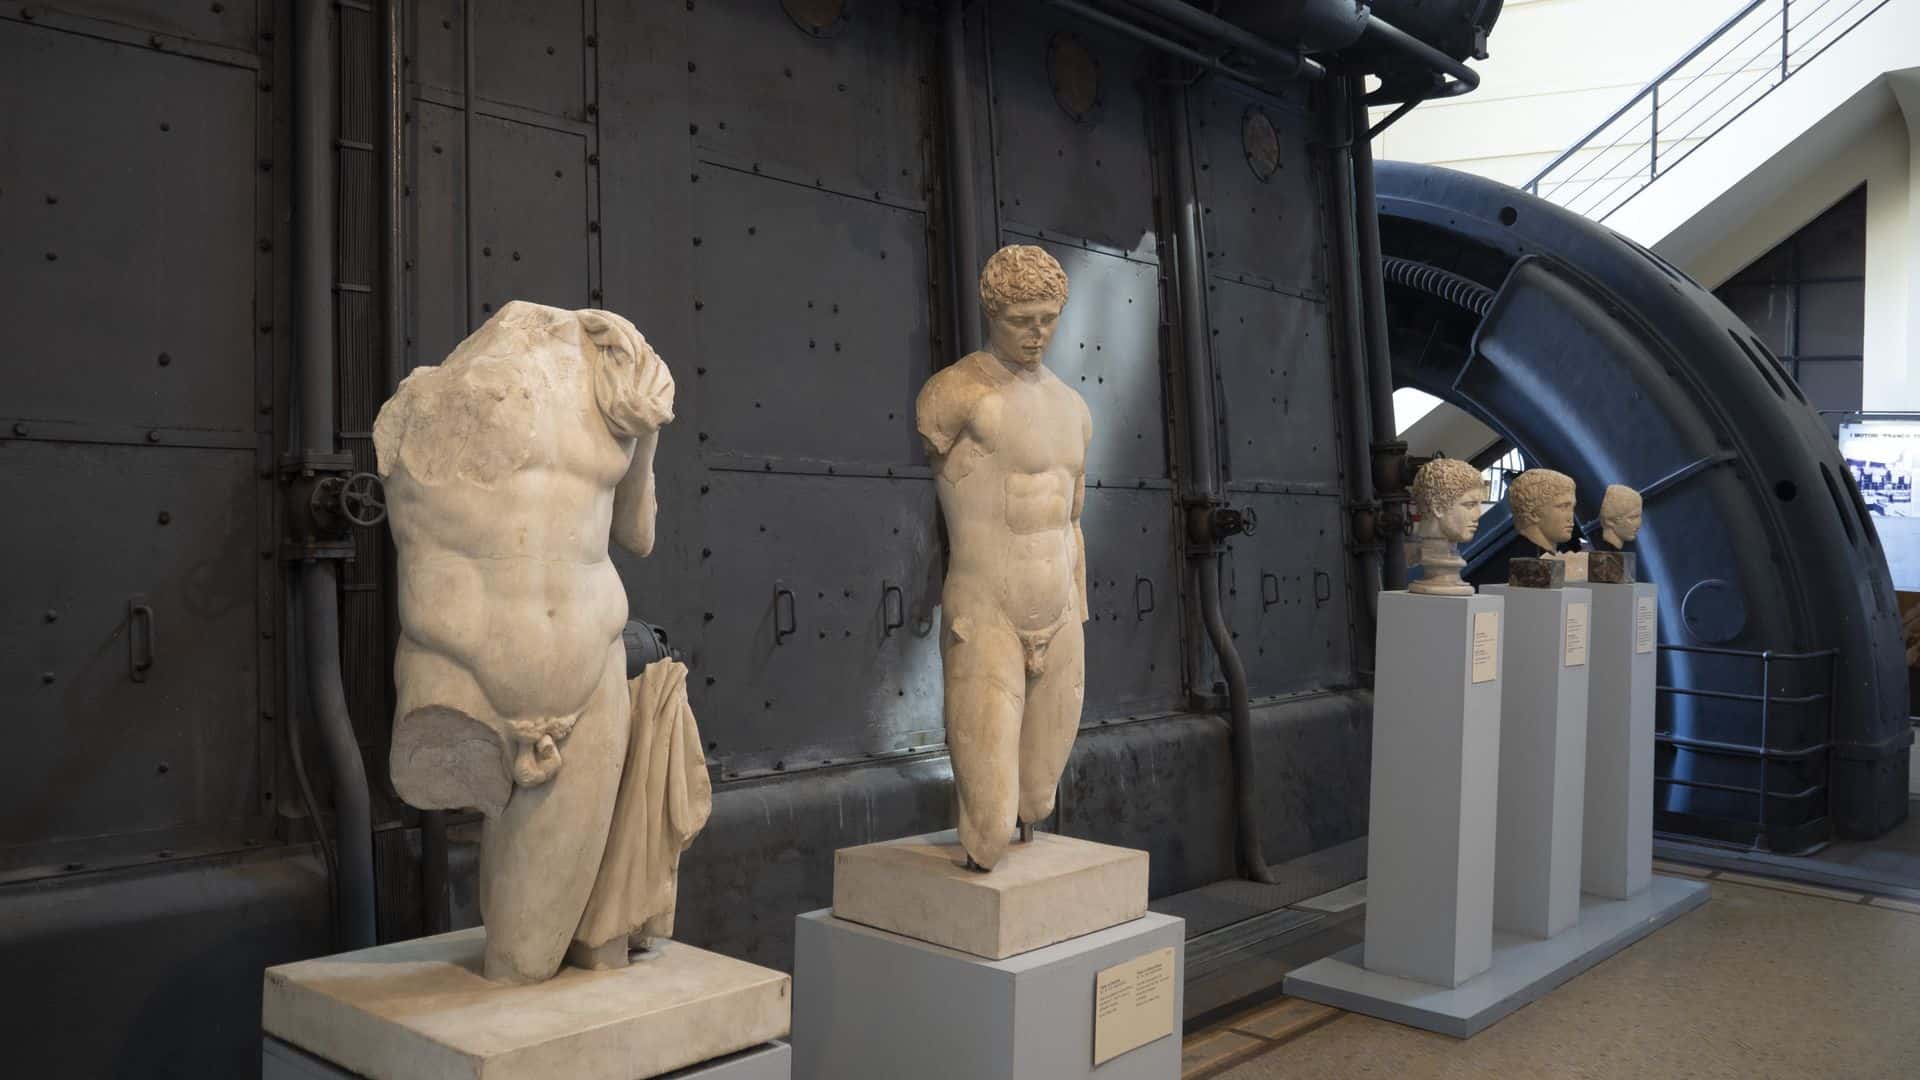 Sculptures inside the Centrale Montmartini, a former power plant.